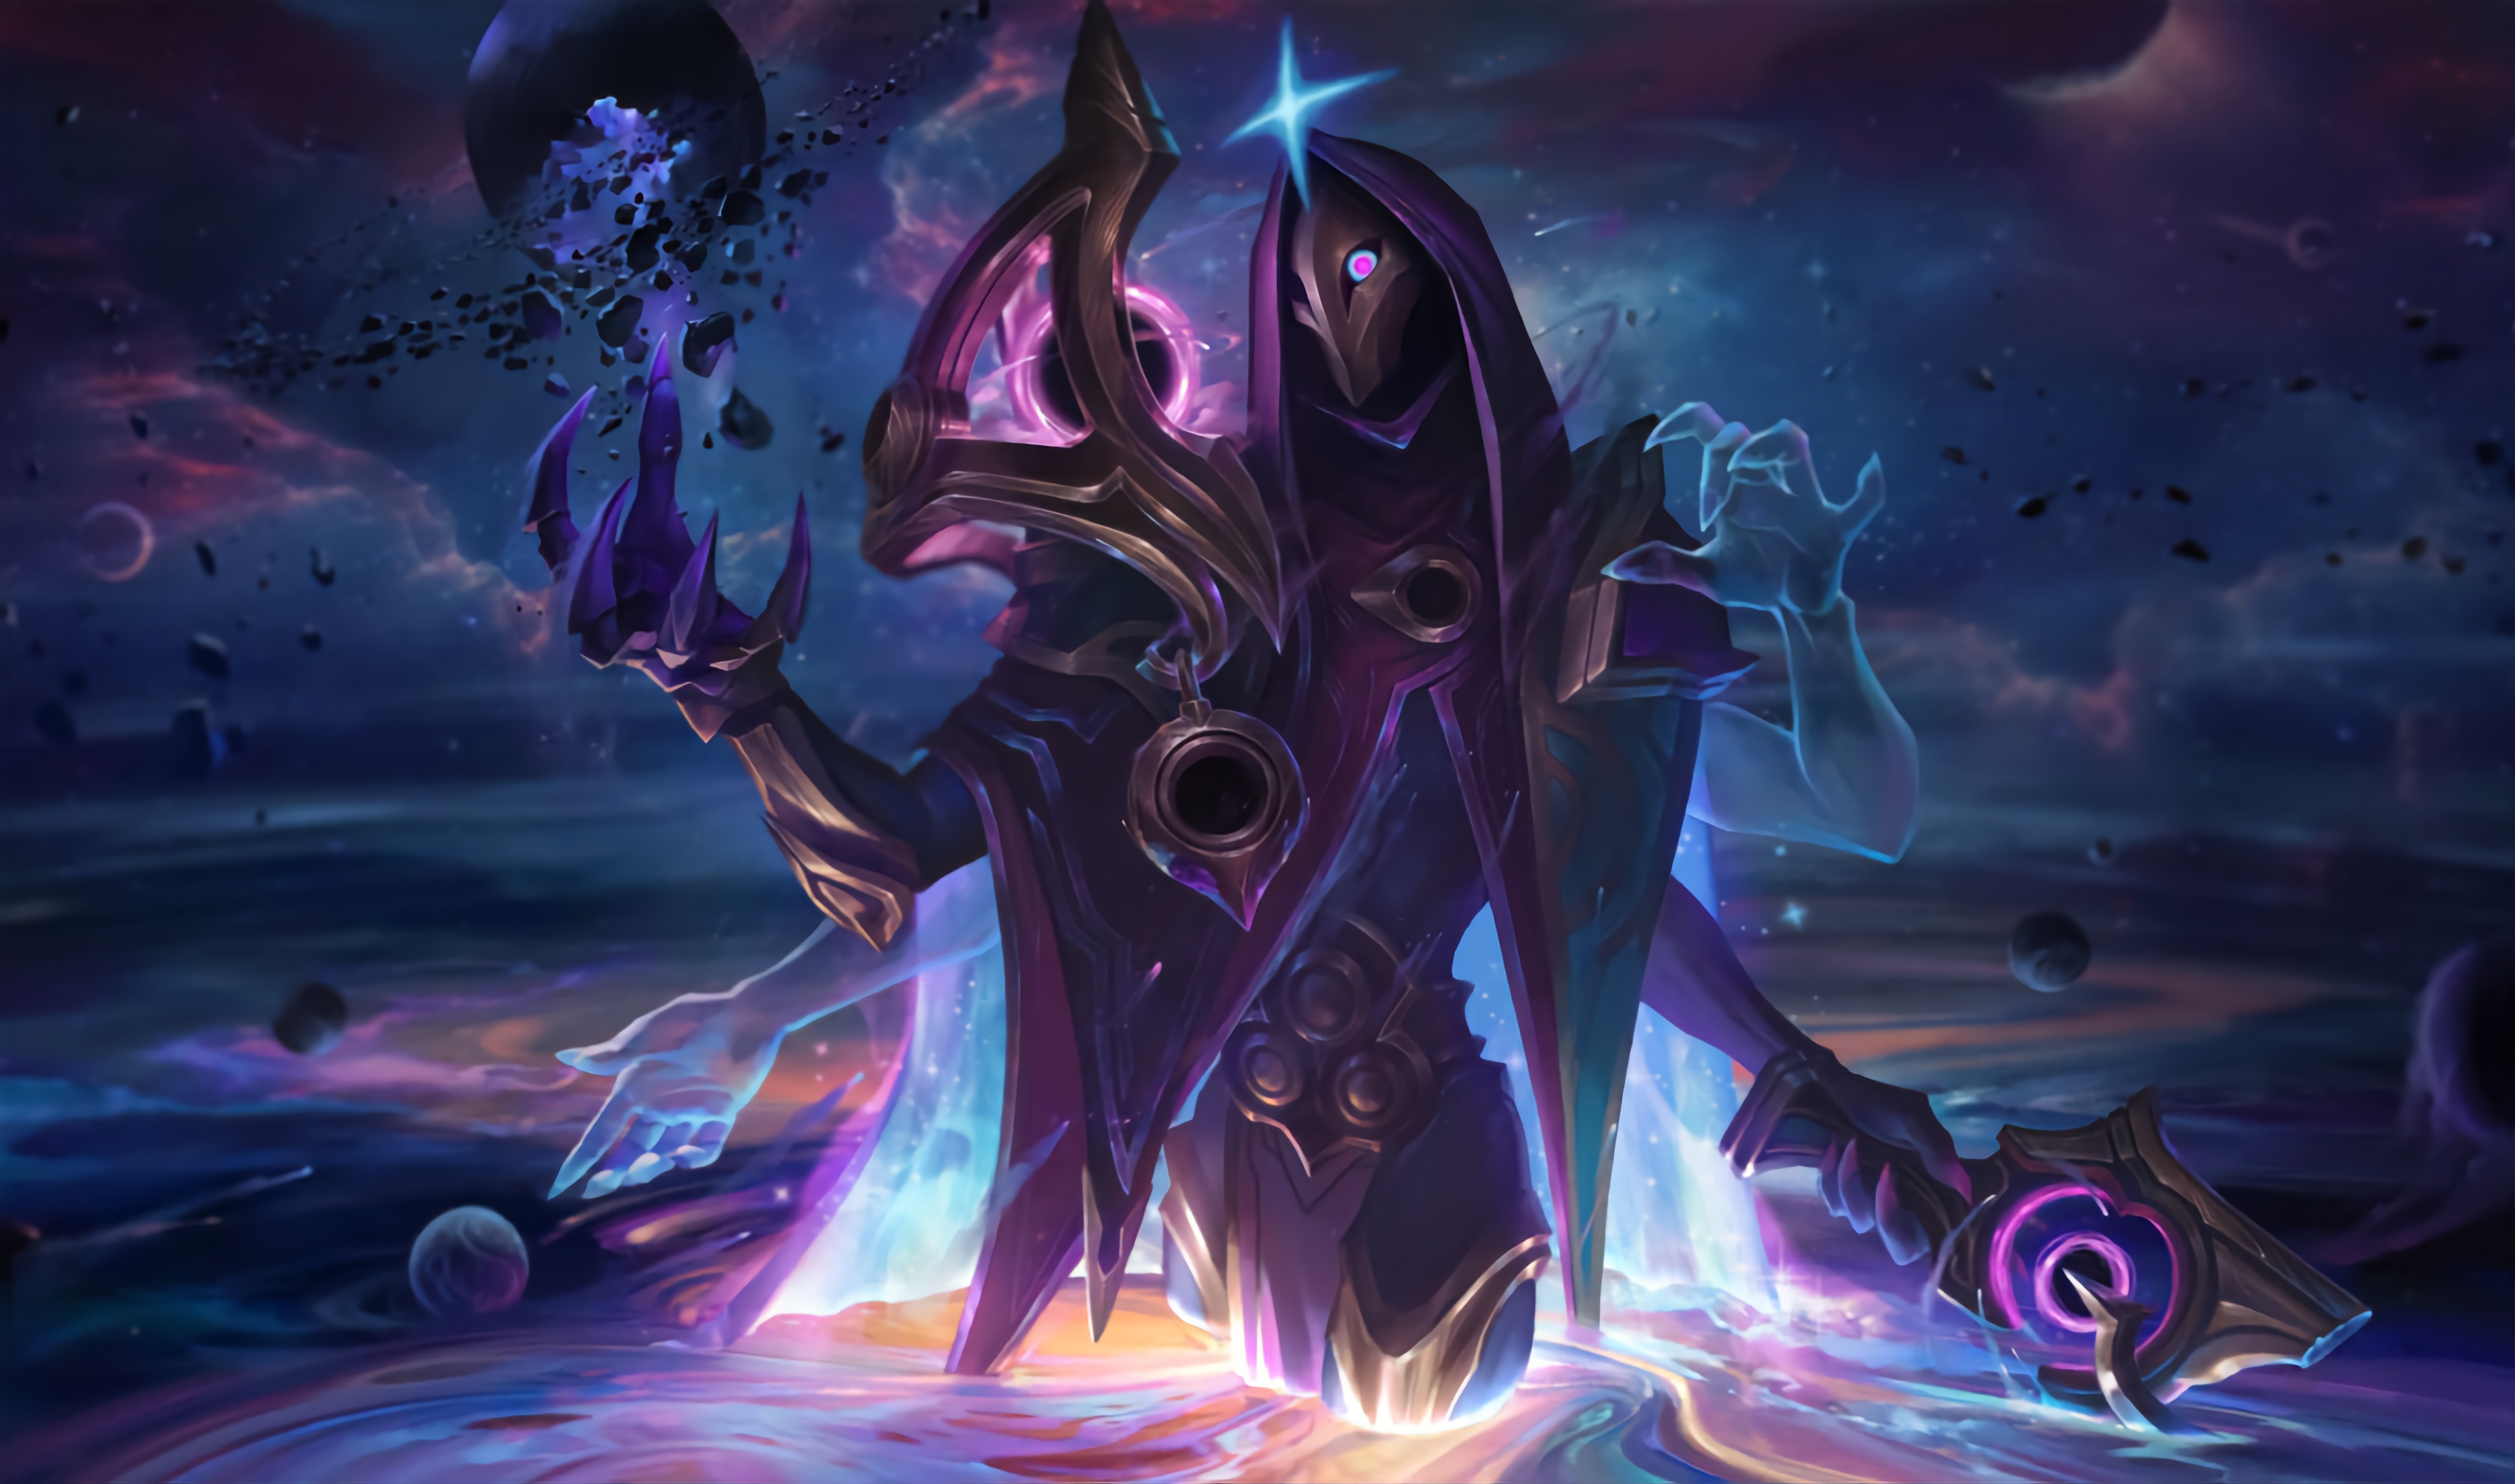 General 4860x2868 Jhin League of Legends PC gaming fantasy art GZG Jhin (League of Legends) Dark Cosmic (League of Legends) Riot Games 4K Cosmic (League of Legends)